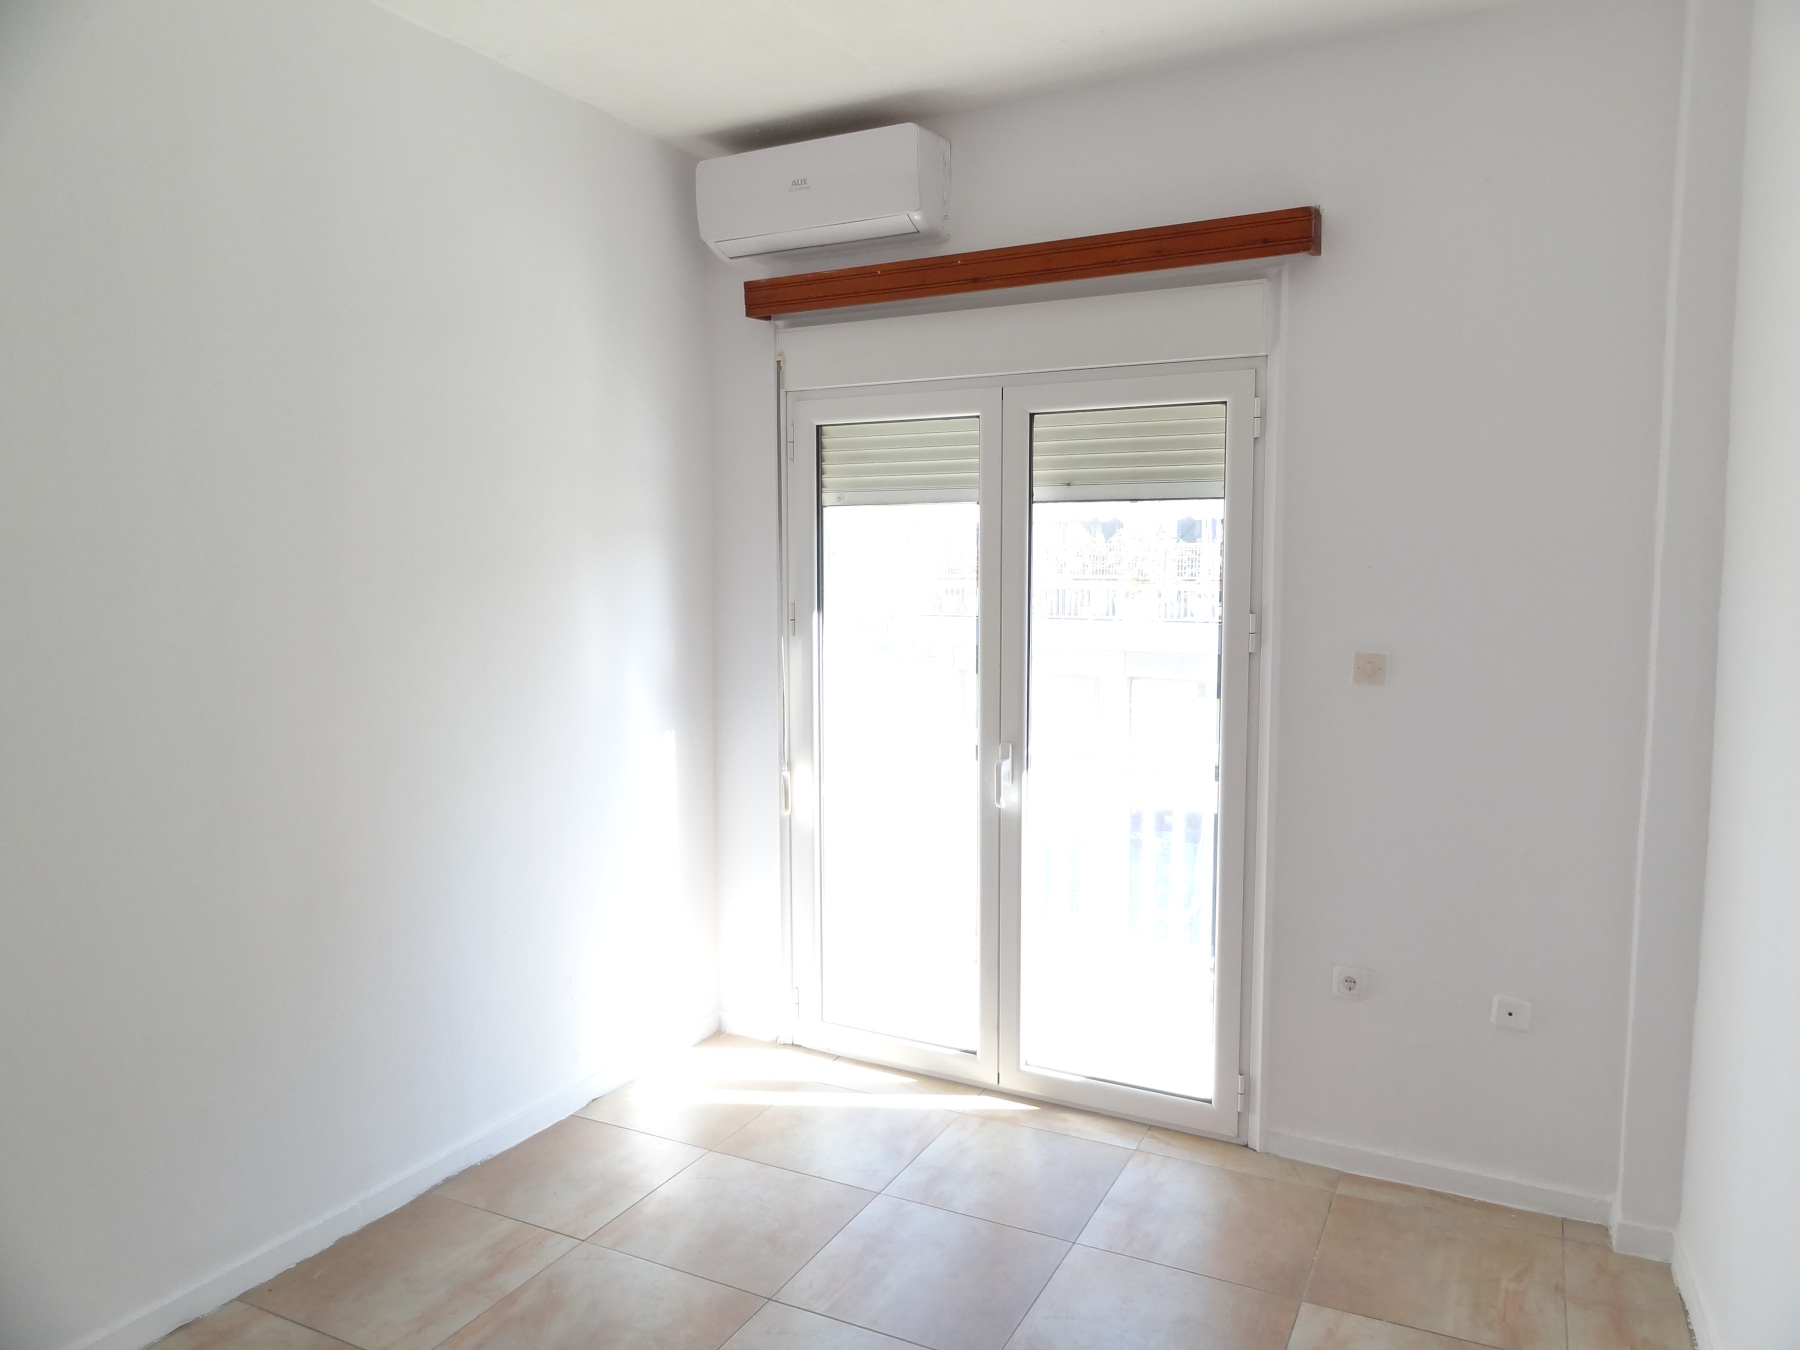 1 bedroom apartment for sale, 55 sq.m. 1st floor in the area of the nursing home in Ioannina